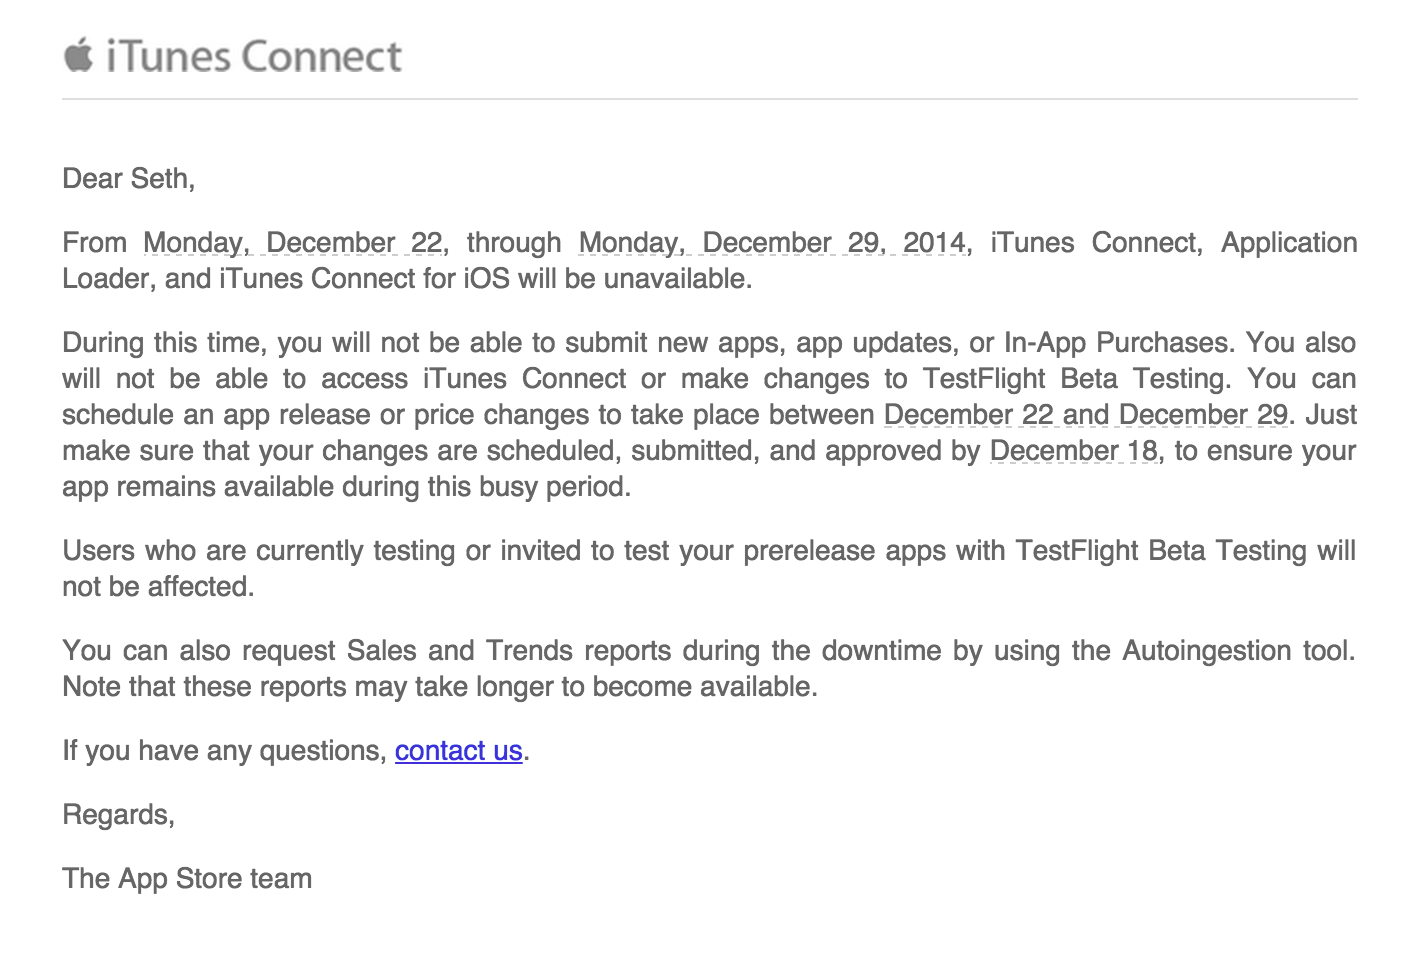 iTunes Connect shutting down for holidays between December 22-29 - 9to5Mac